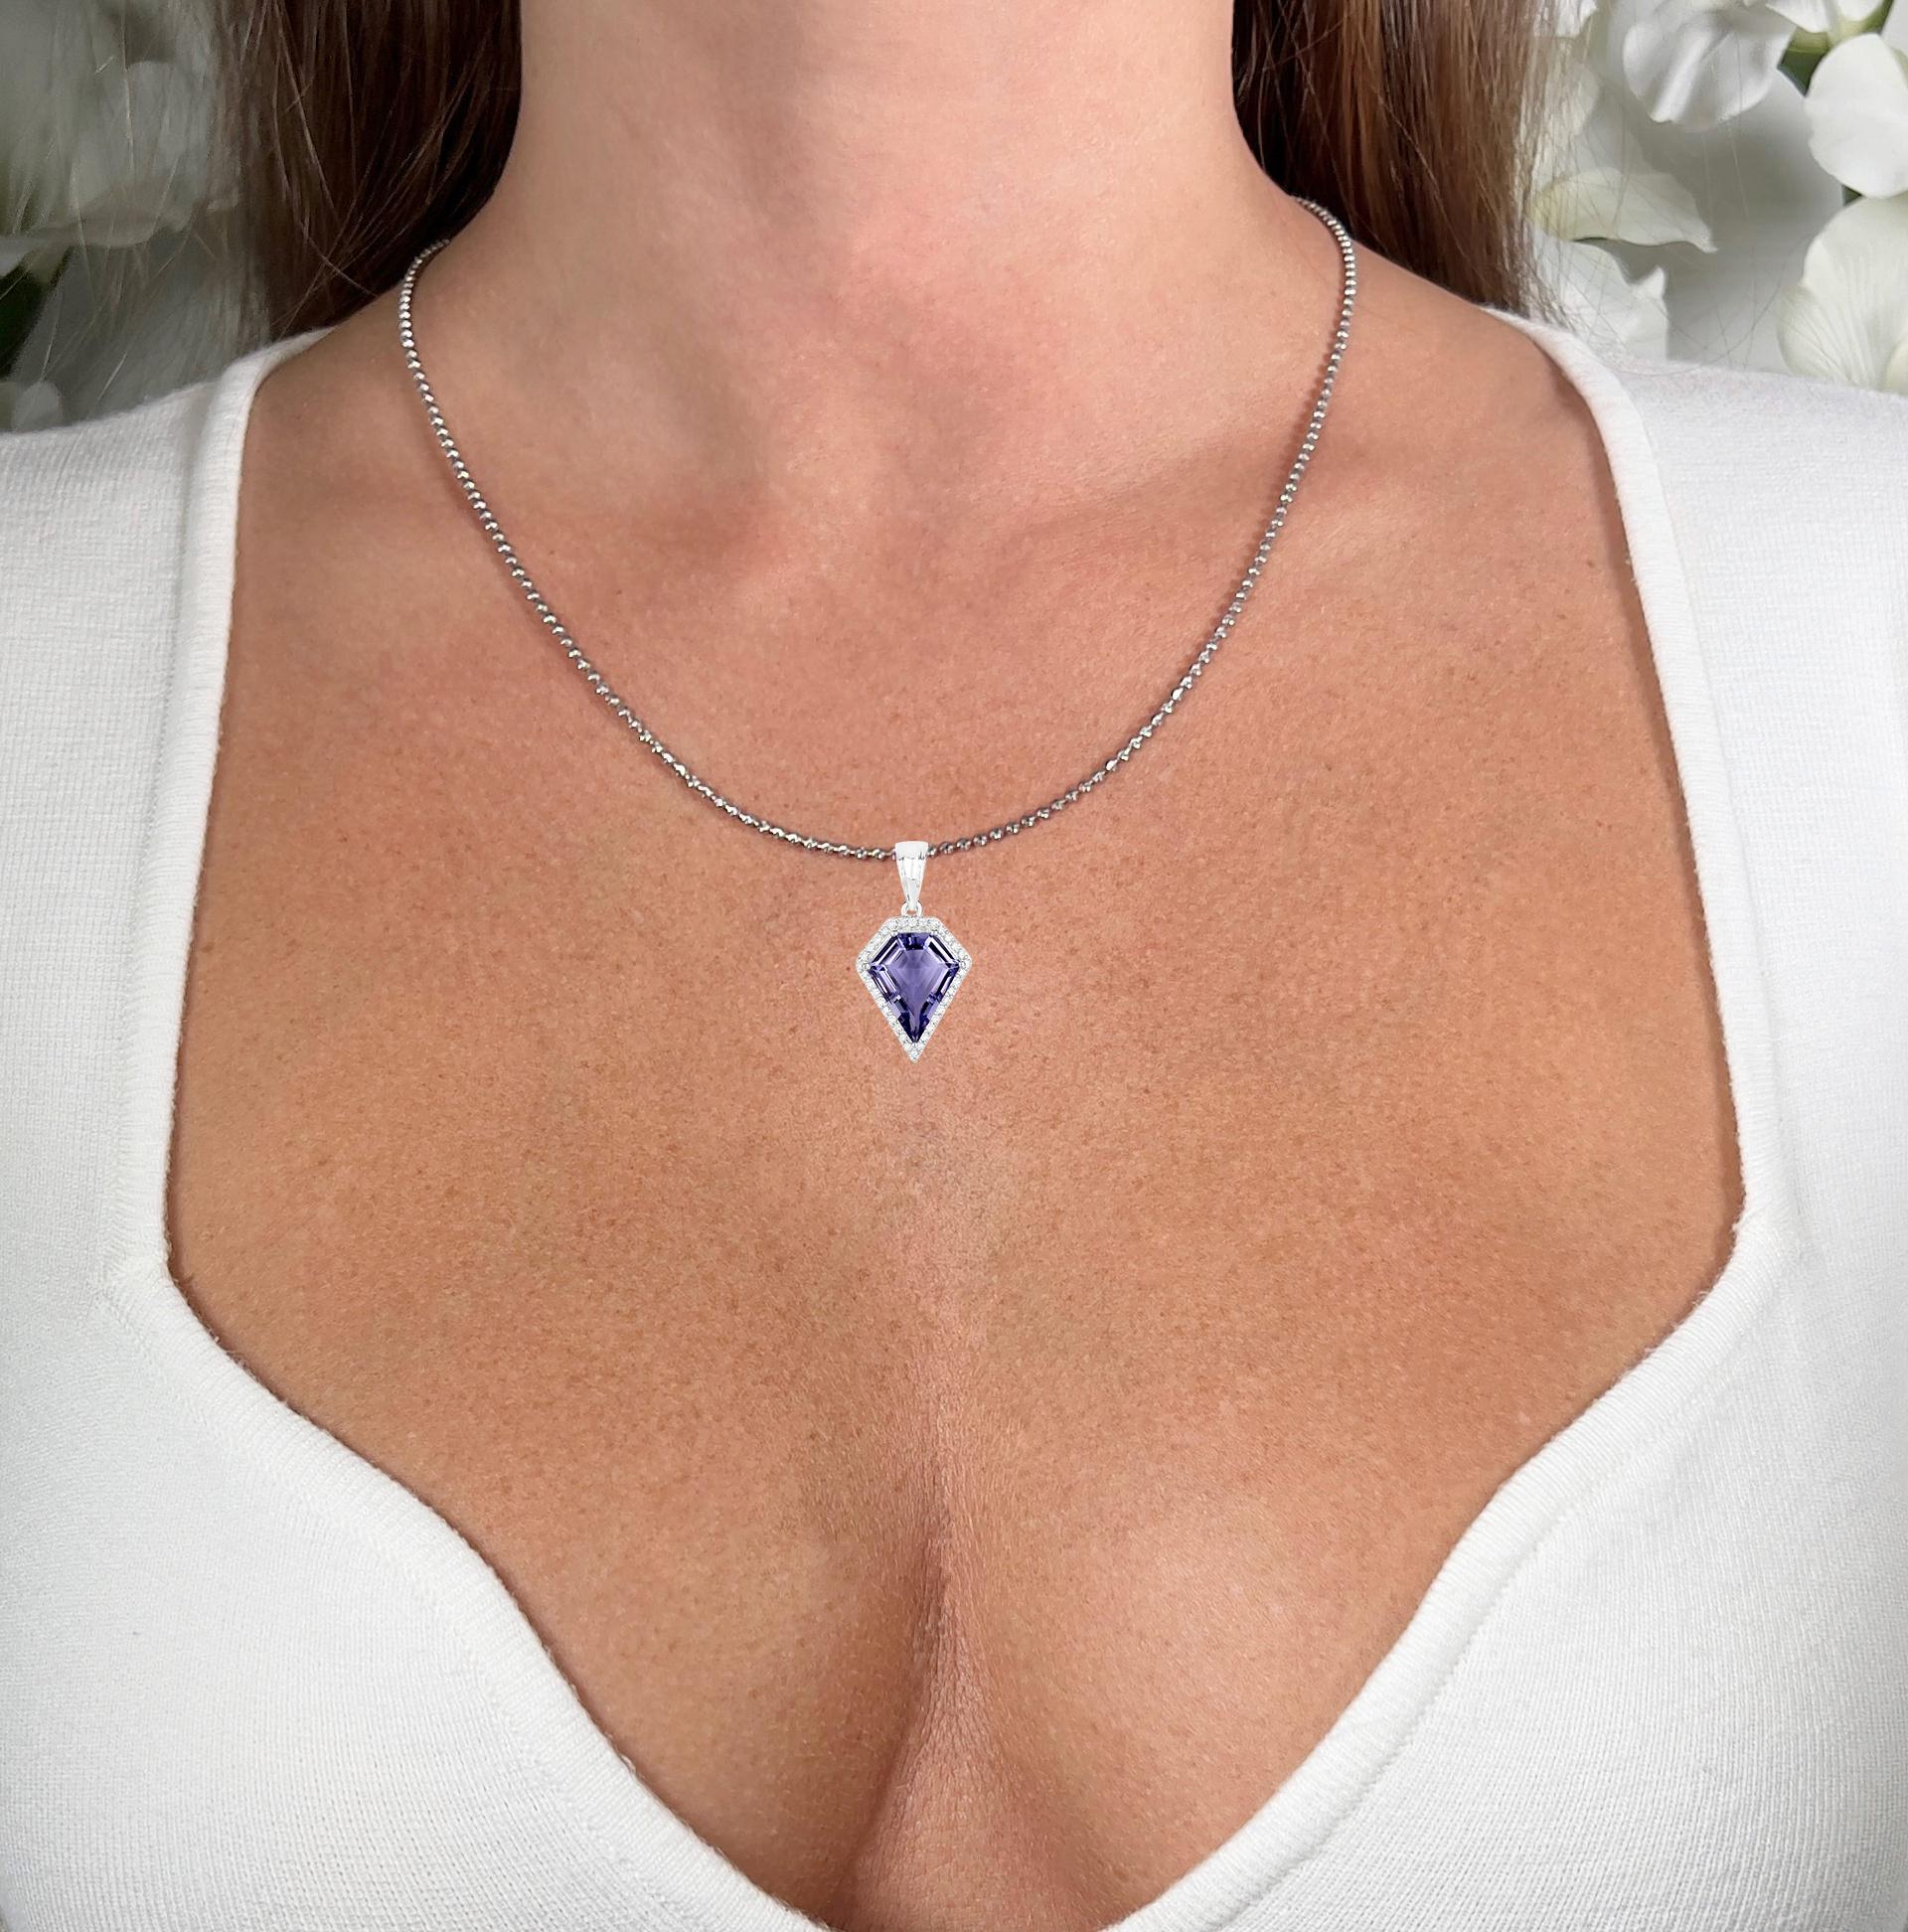 It comes with the Gemological Appraisal by GIA GG/AJP
All Gemstones are Natural
Iolite = 4.38 Carat
34 Diamonds = 0.27 Carats
Metal: 14K White Gold
Pendant Dimensions: 30 x 15 mm